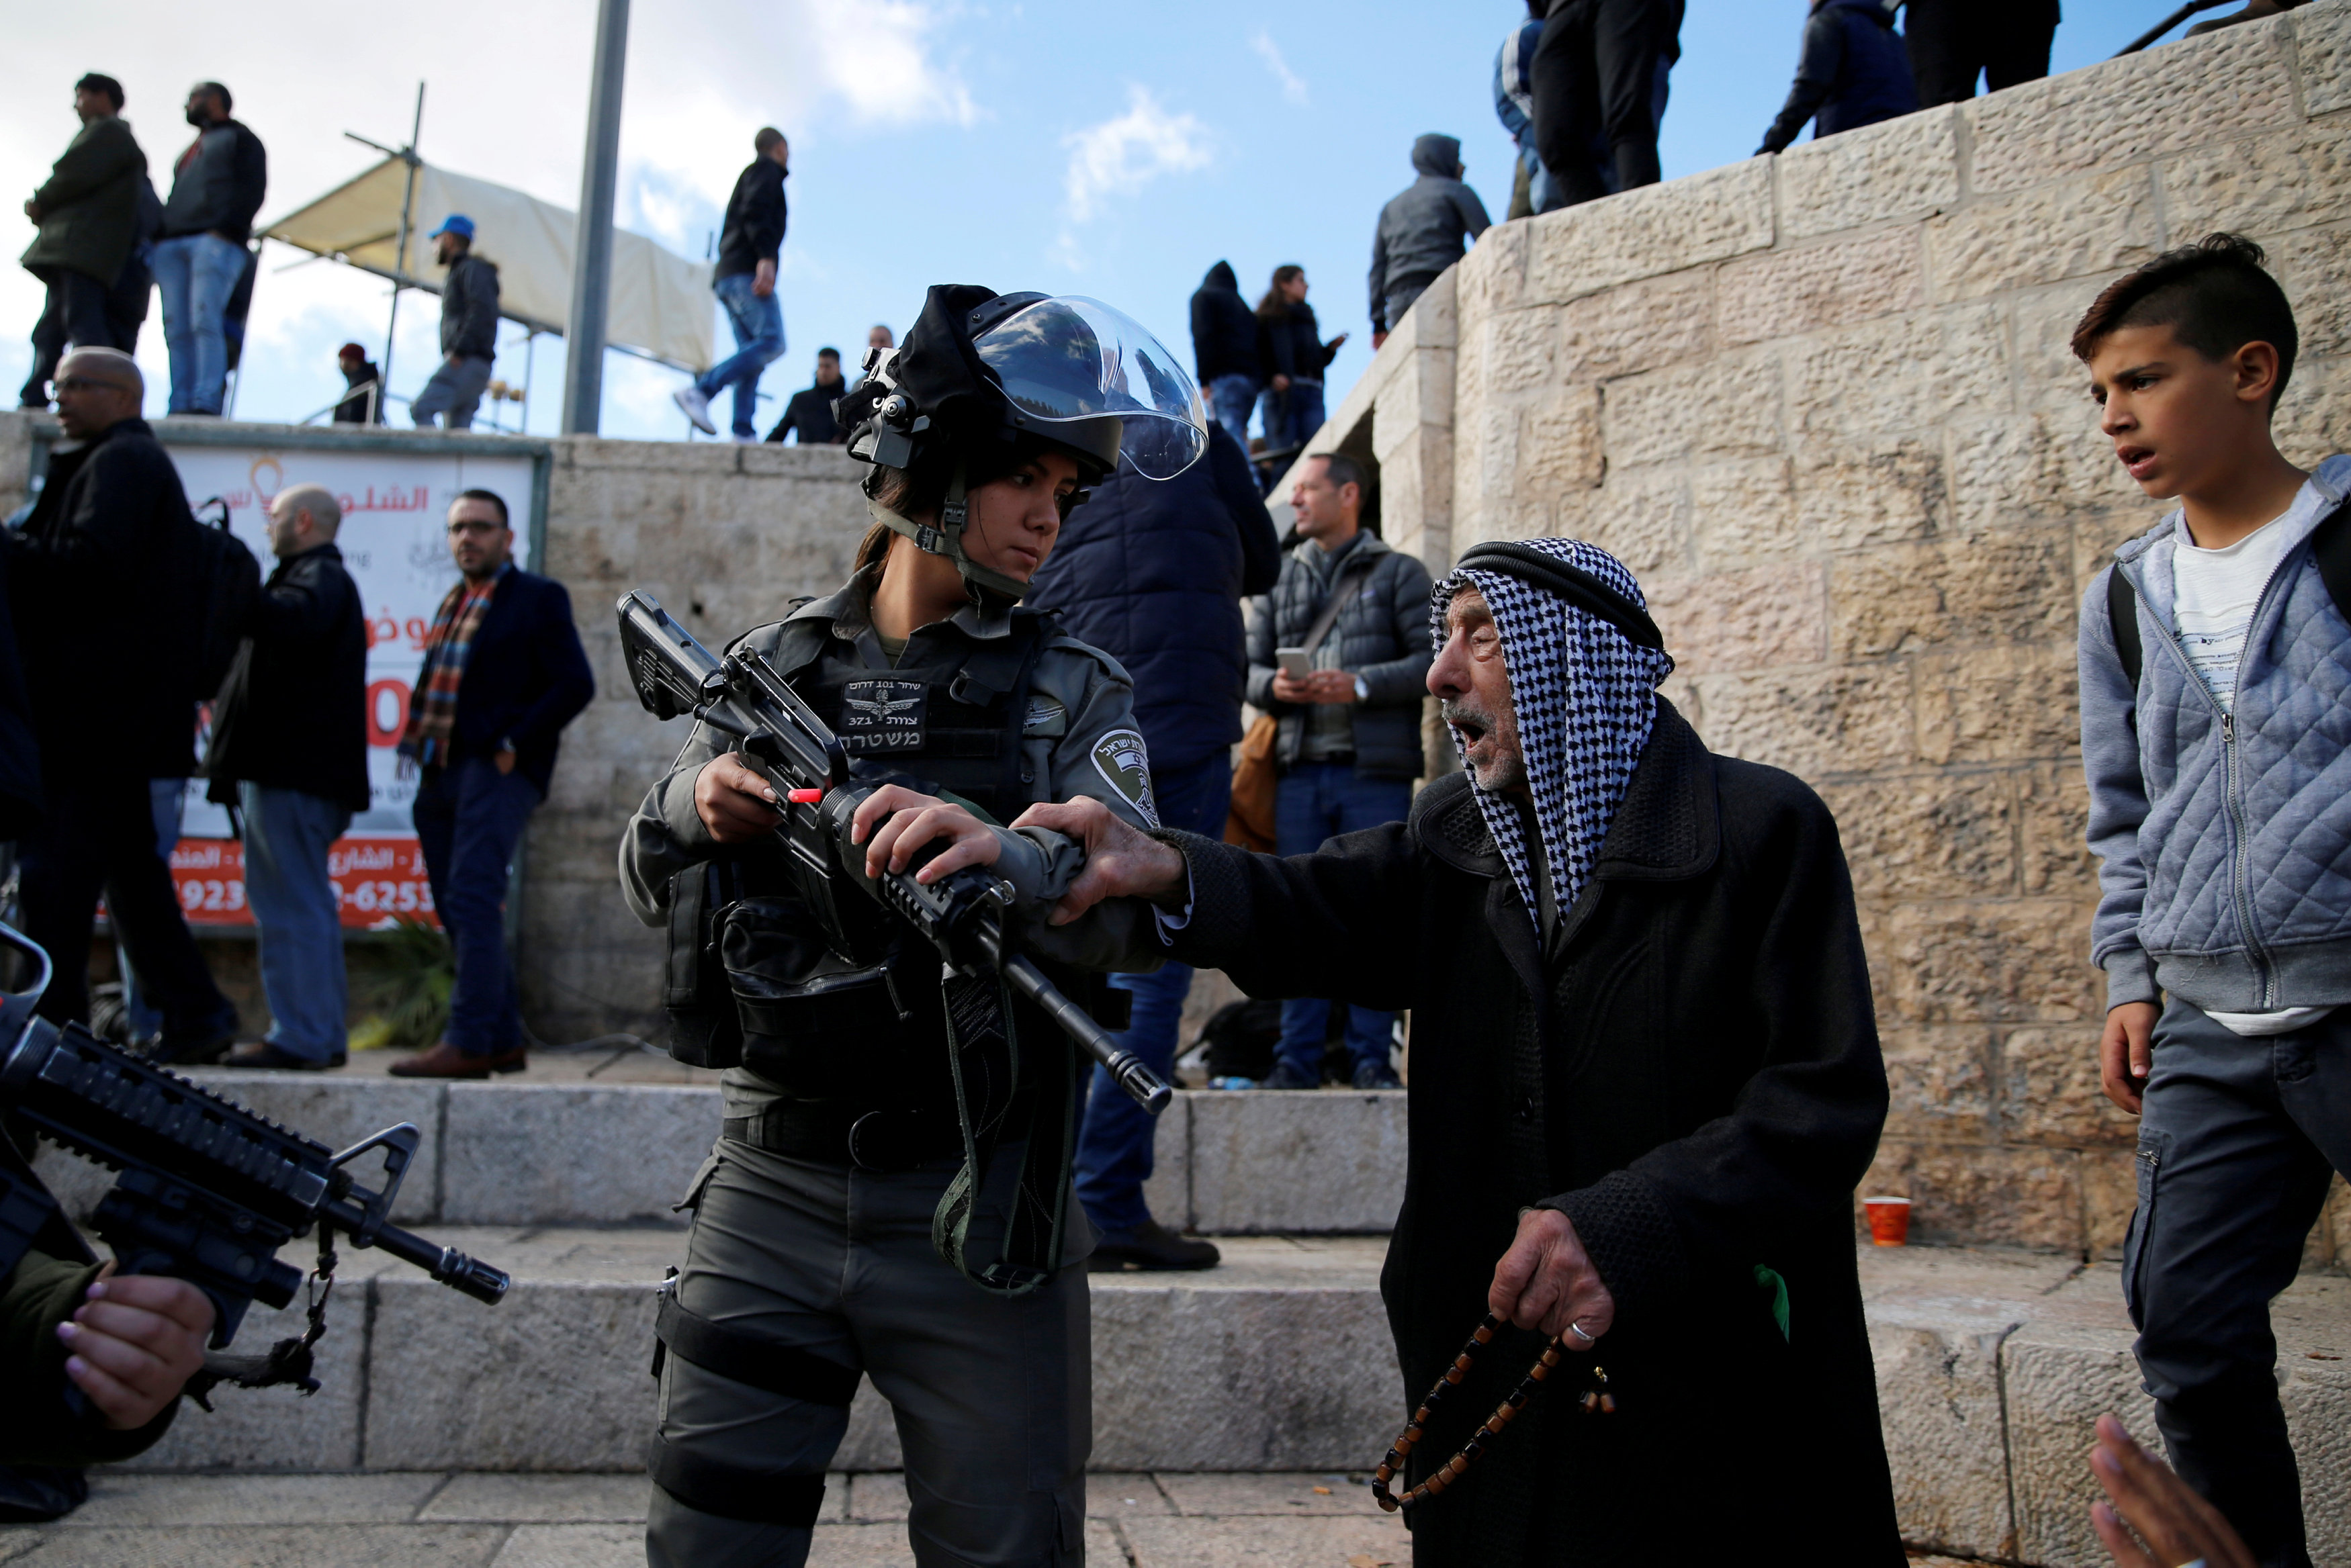 A Palestinian man argues with an Israeli border policewoman during a protest near Damascus Gate in Jerusalem's Old City December 7, 2017. u00e2u20acu201d Reuters pic